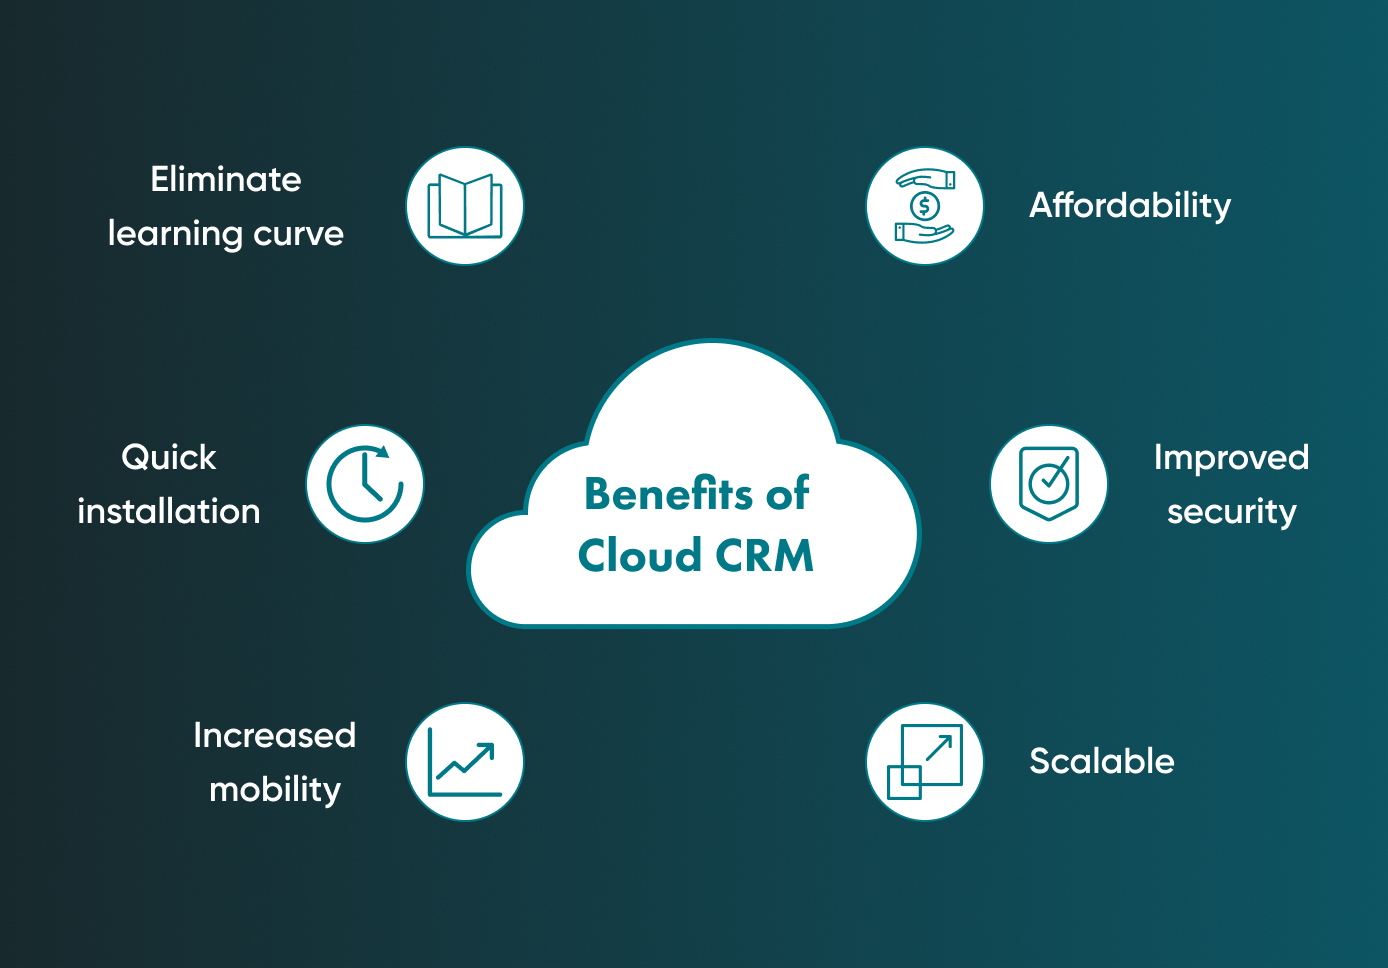 There are different forms of CRM, and one of the more versatile can be seen with the benefits of Cloud CRM.